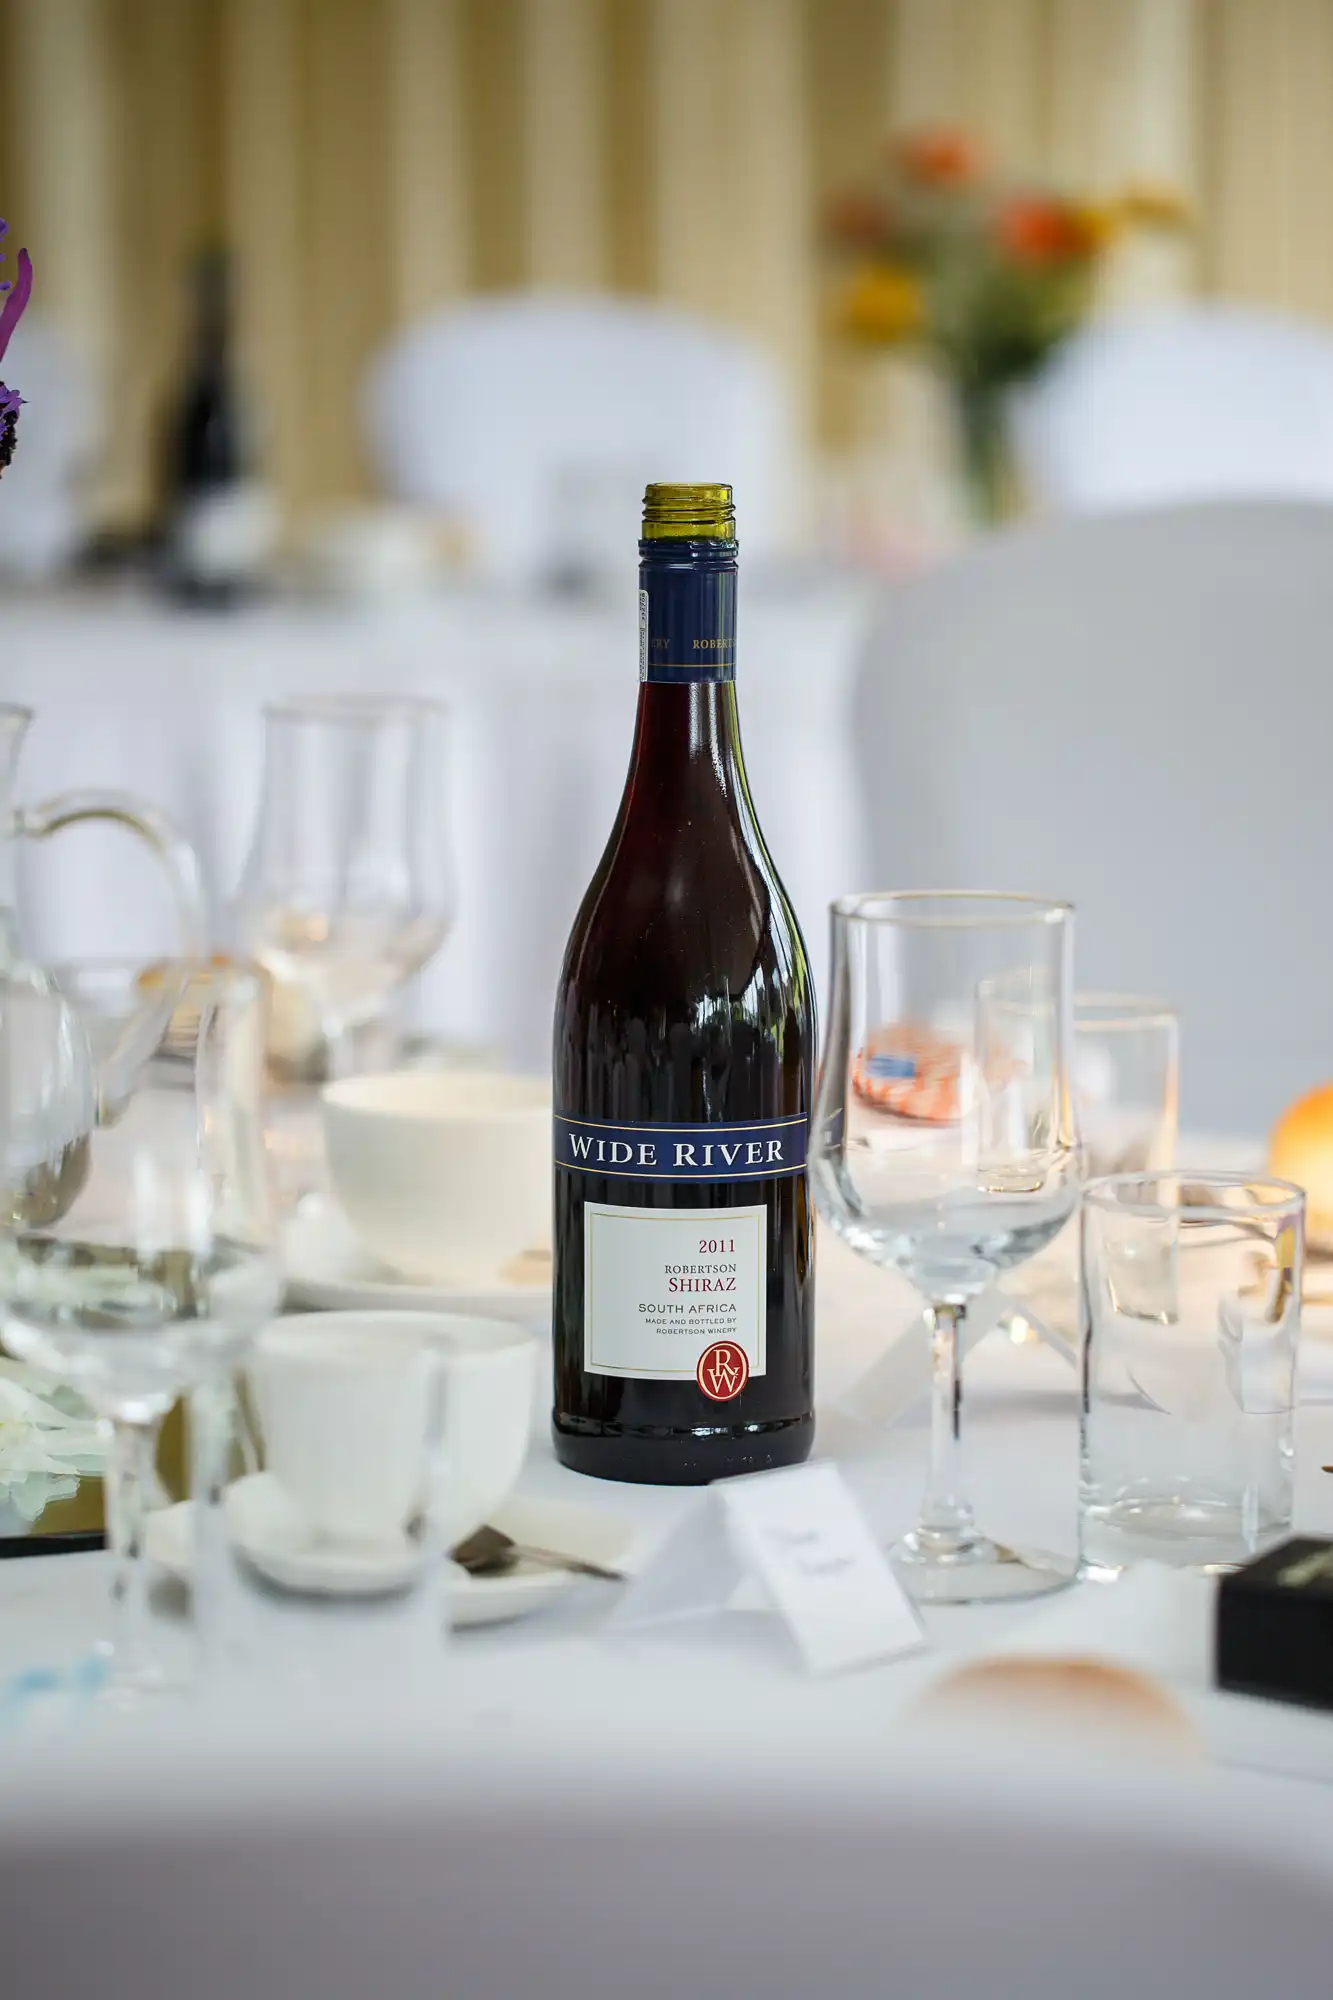 A bottle of "wide river" shiraz wine from 2017 stands on a dining table amid empty glasses and white chair covers.